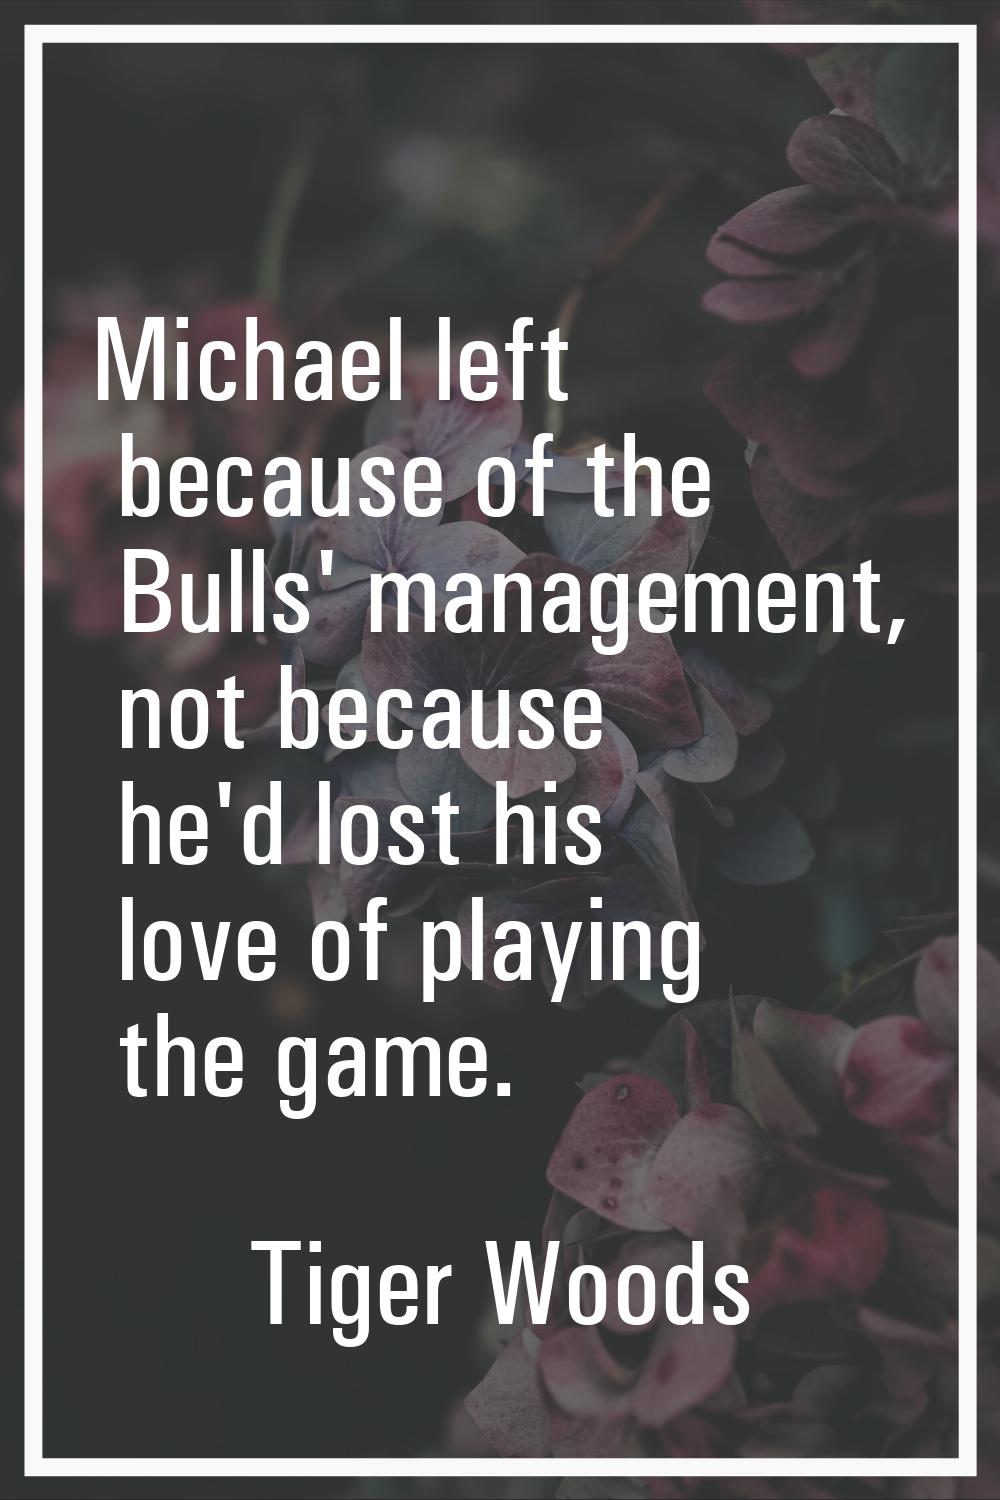 Michael left because of the Bulls' management, not because he'd lost his love of playing the game.